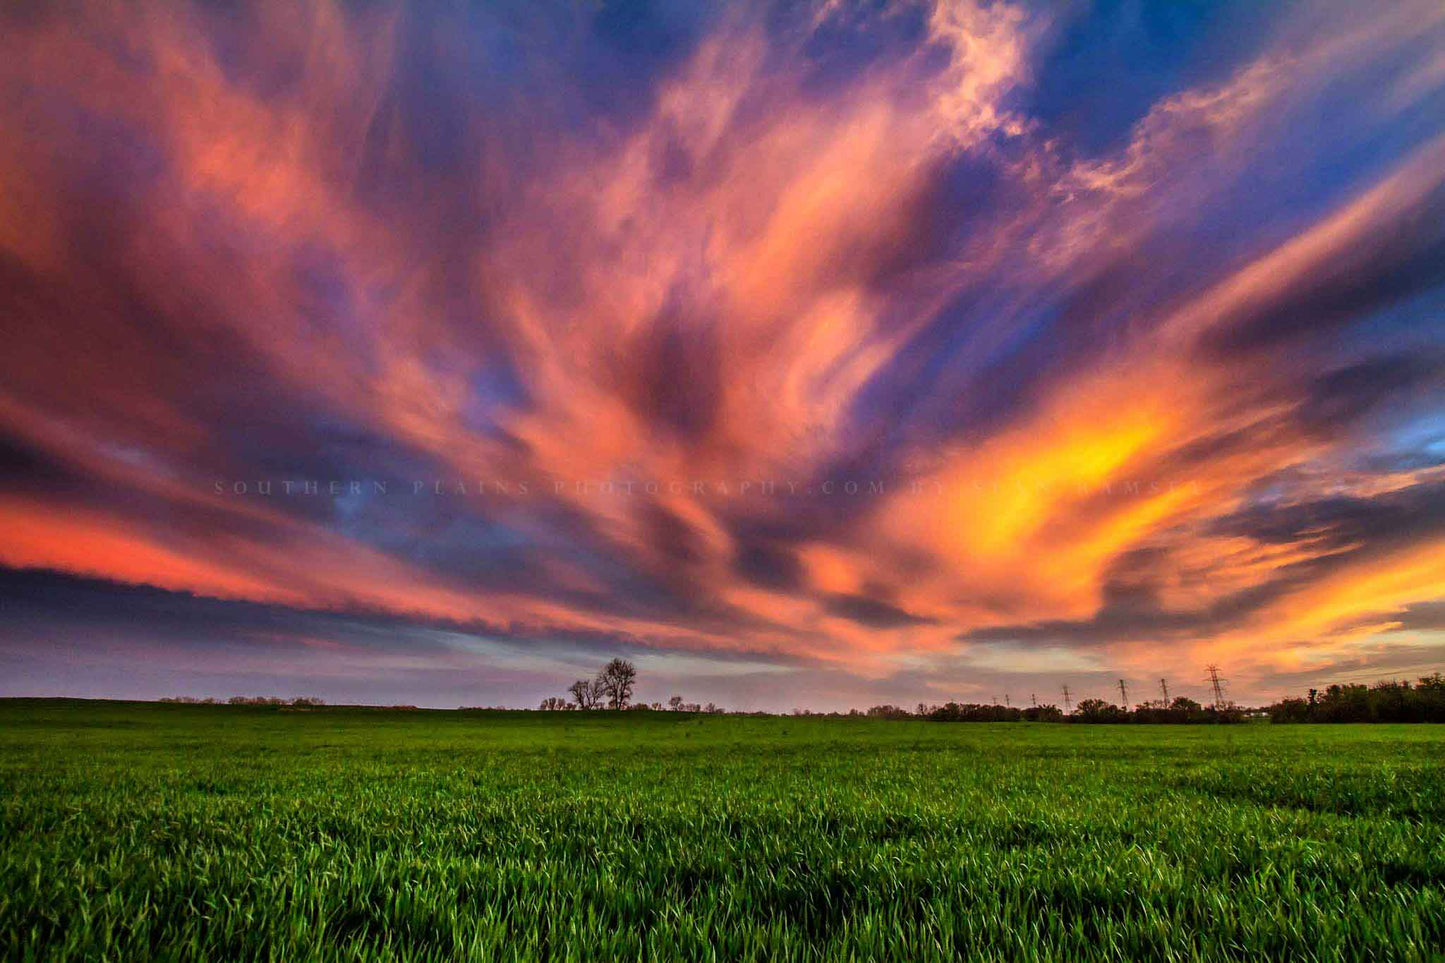 Nature photography print of clouds illuminated by sunlight over a field at sunset on a spring evening in Oklahoma by Sean Ramsey of Southern Plains Photography.